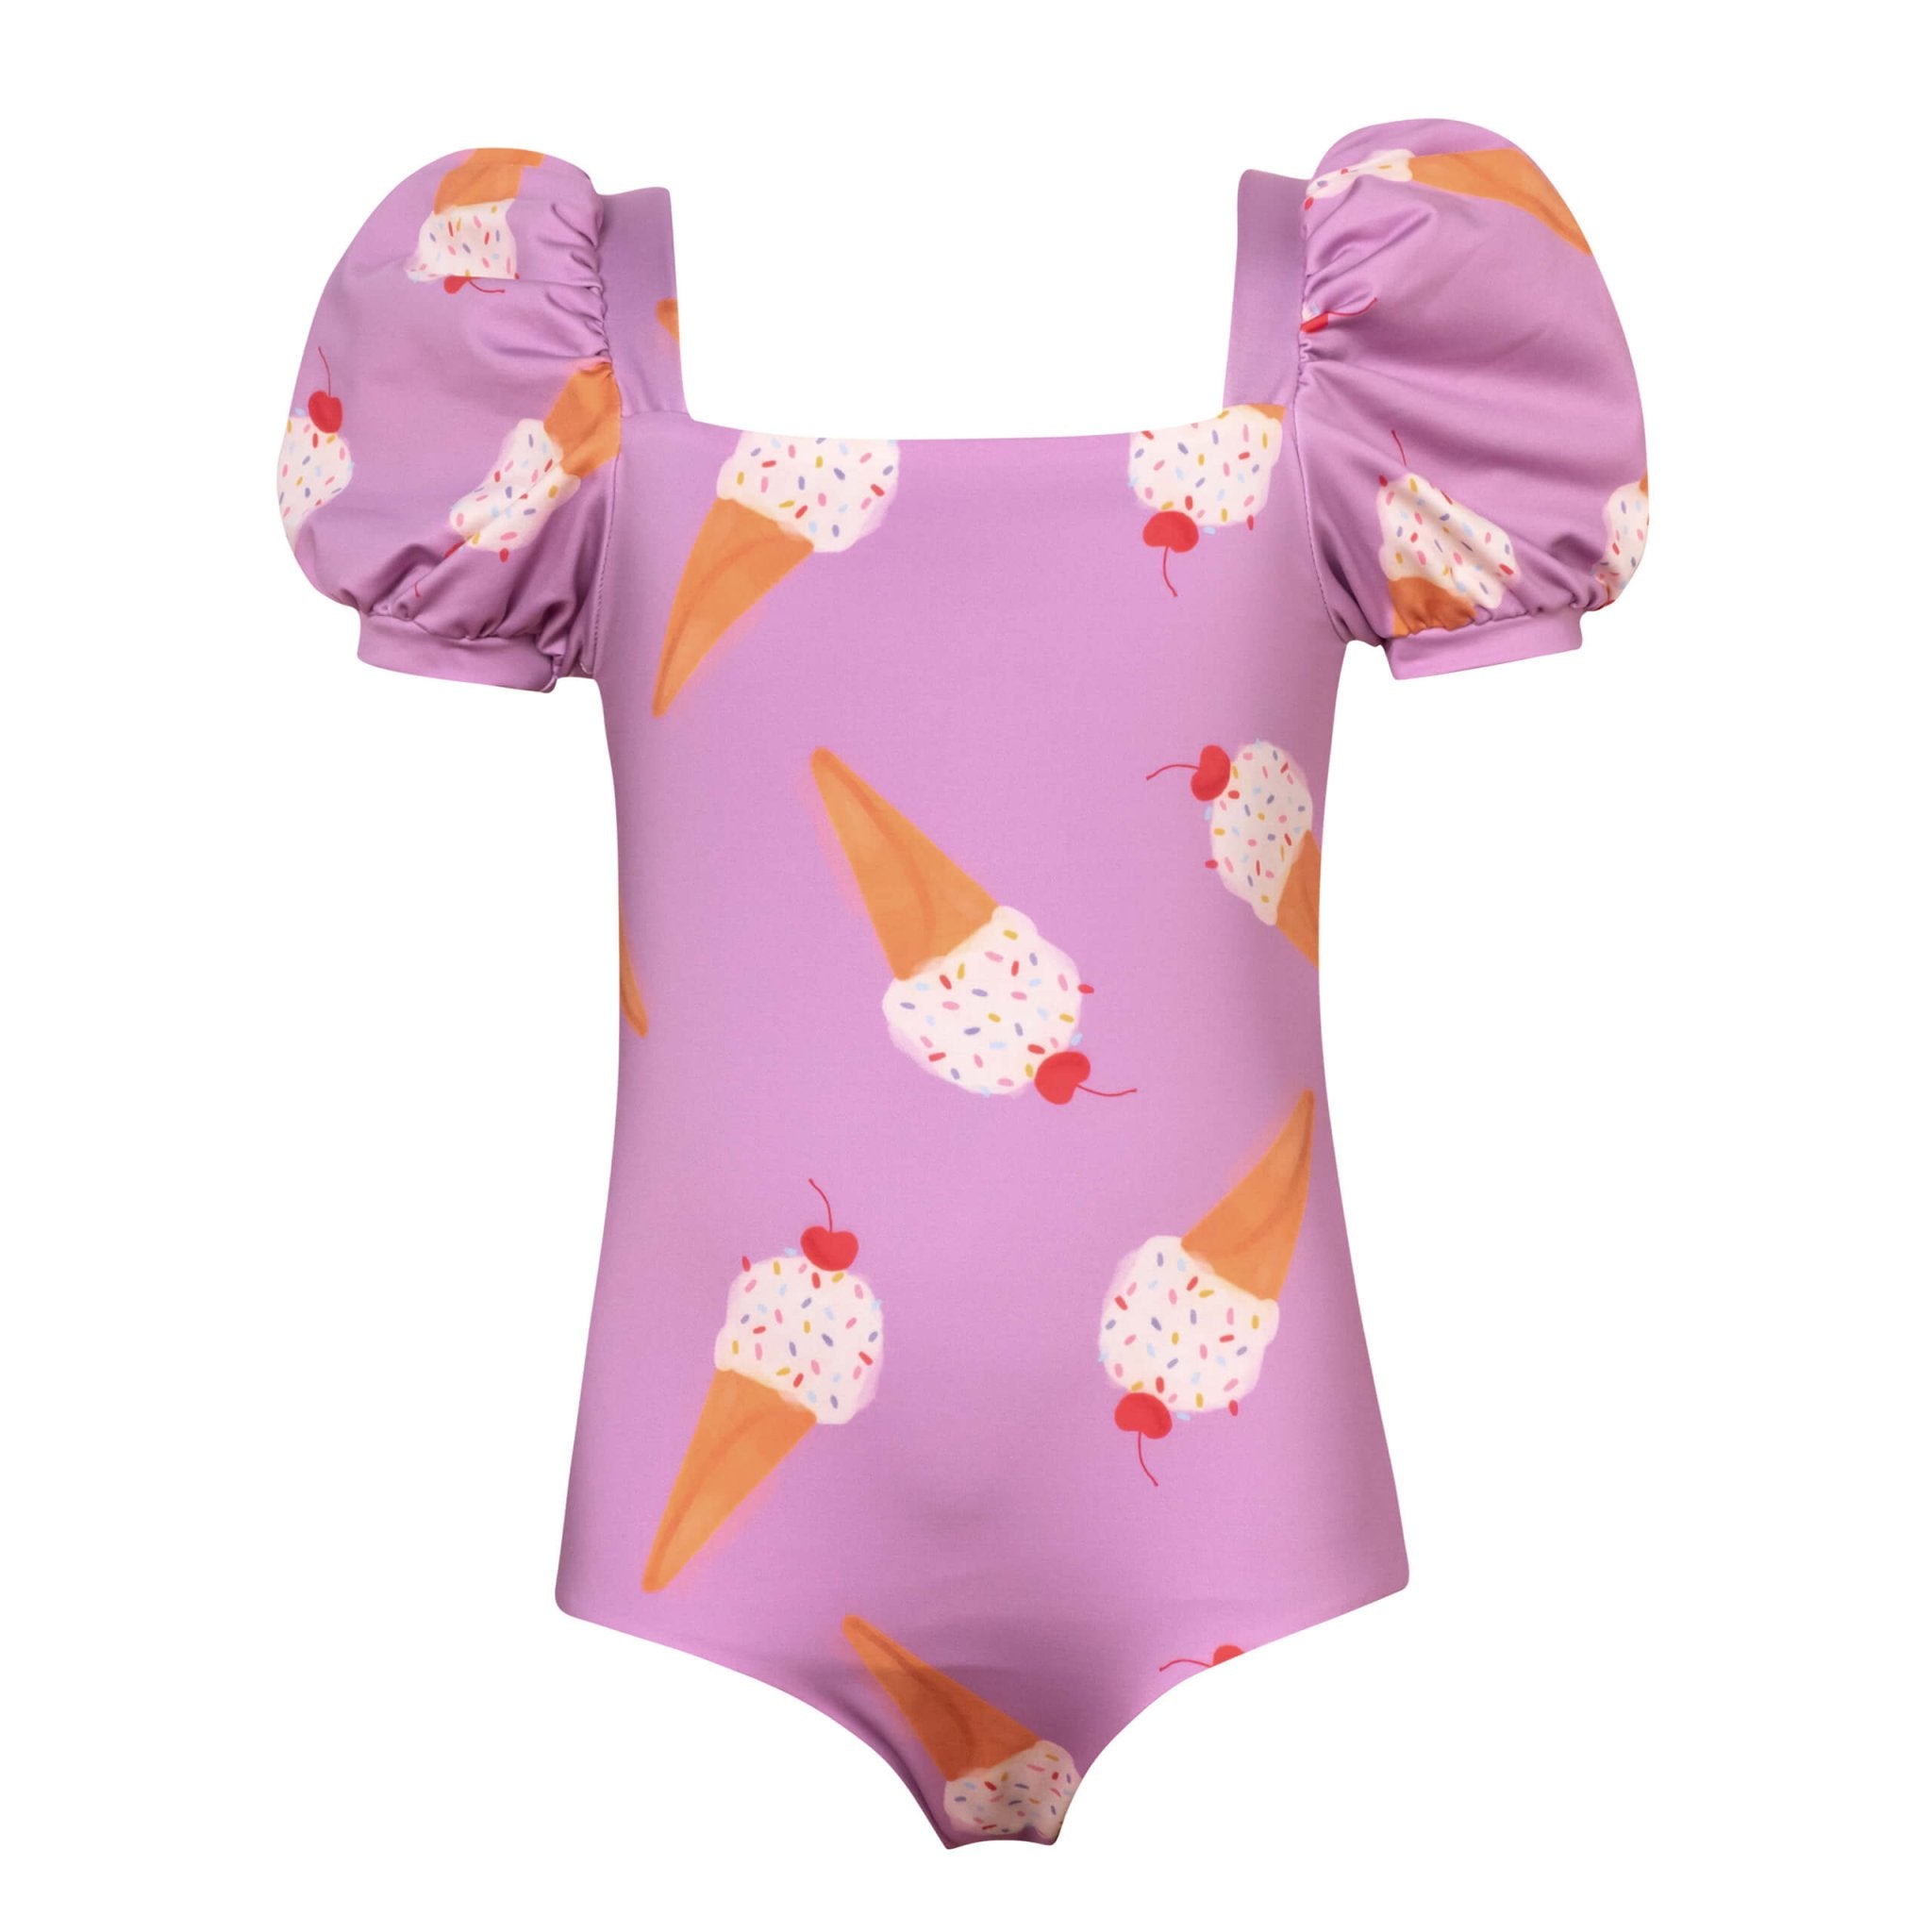 A pink puff-sleeve one-piece that is covered in an adorable ice cream pattern. The swimsuit is shown against a white background.